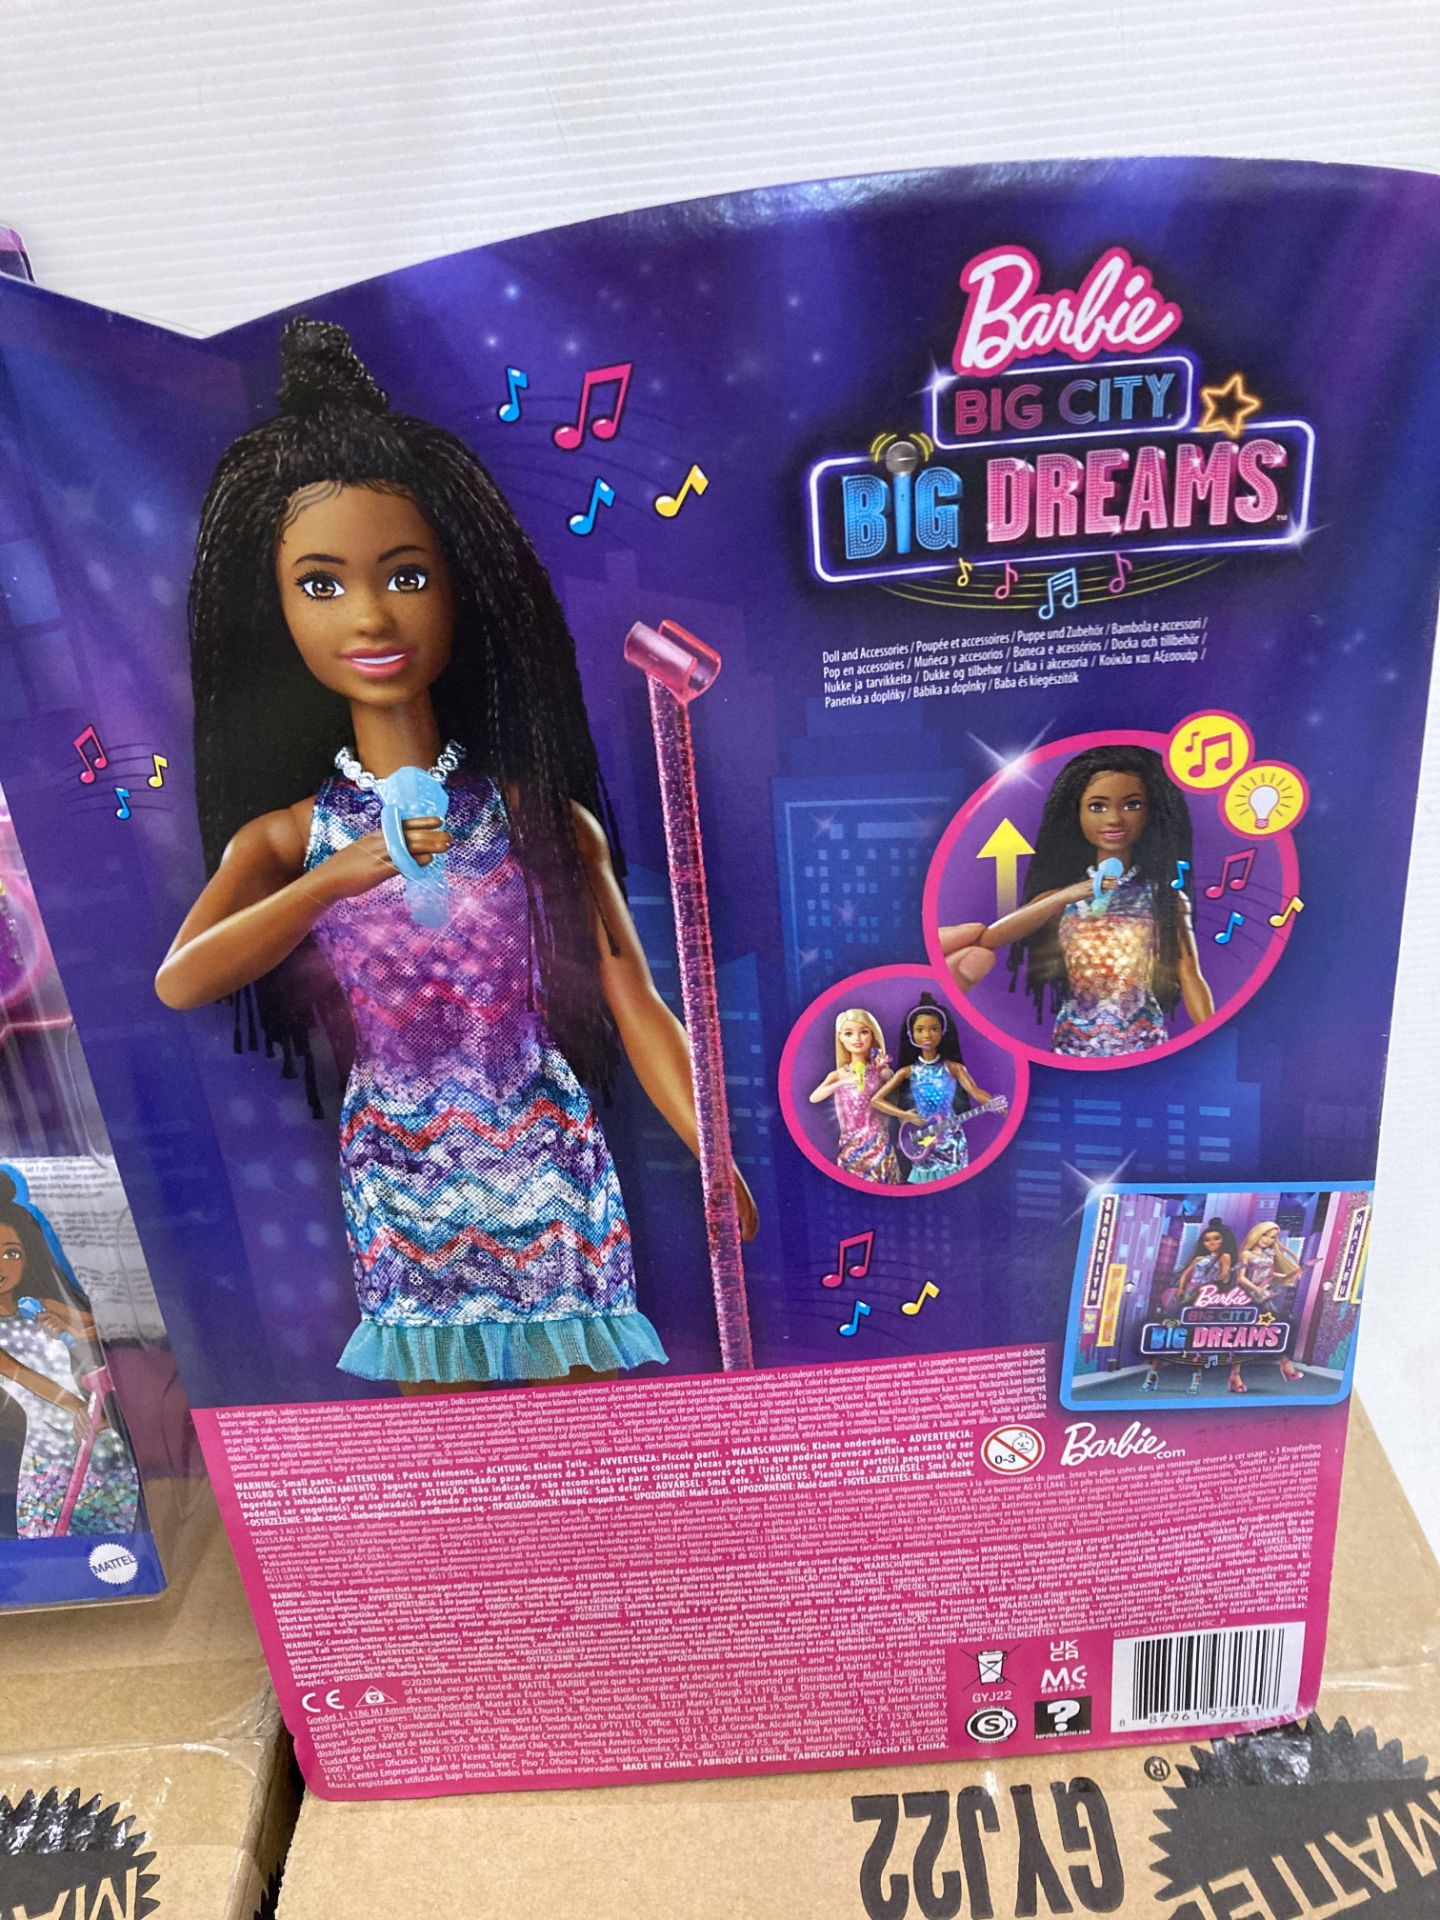 8 x Barbie Big City Dreams doll and accessories (2 x outer boxes) (saleroom location: M08) - Image 3 of 3